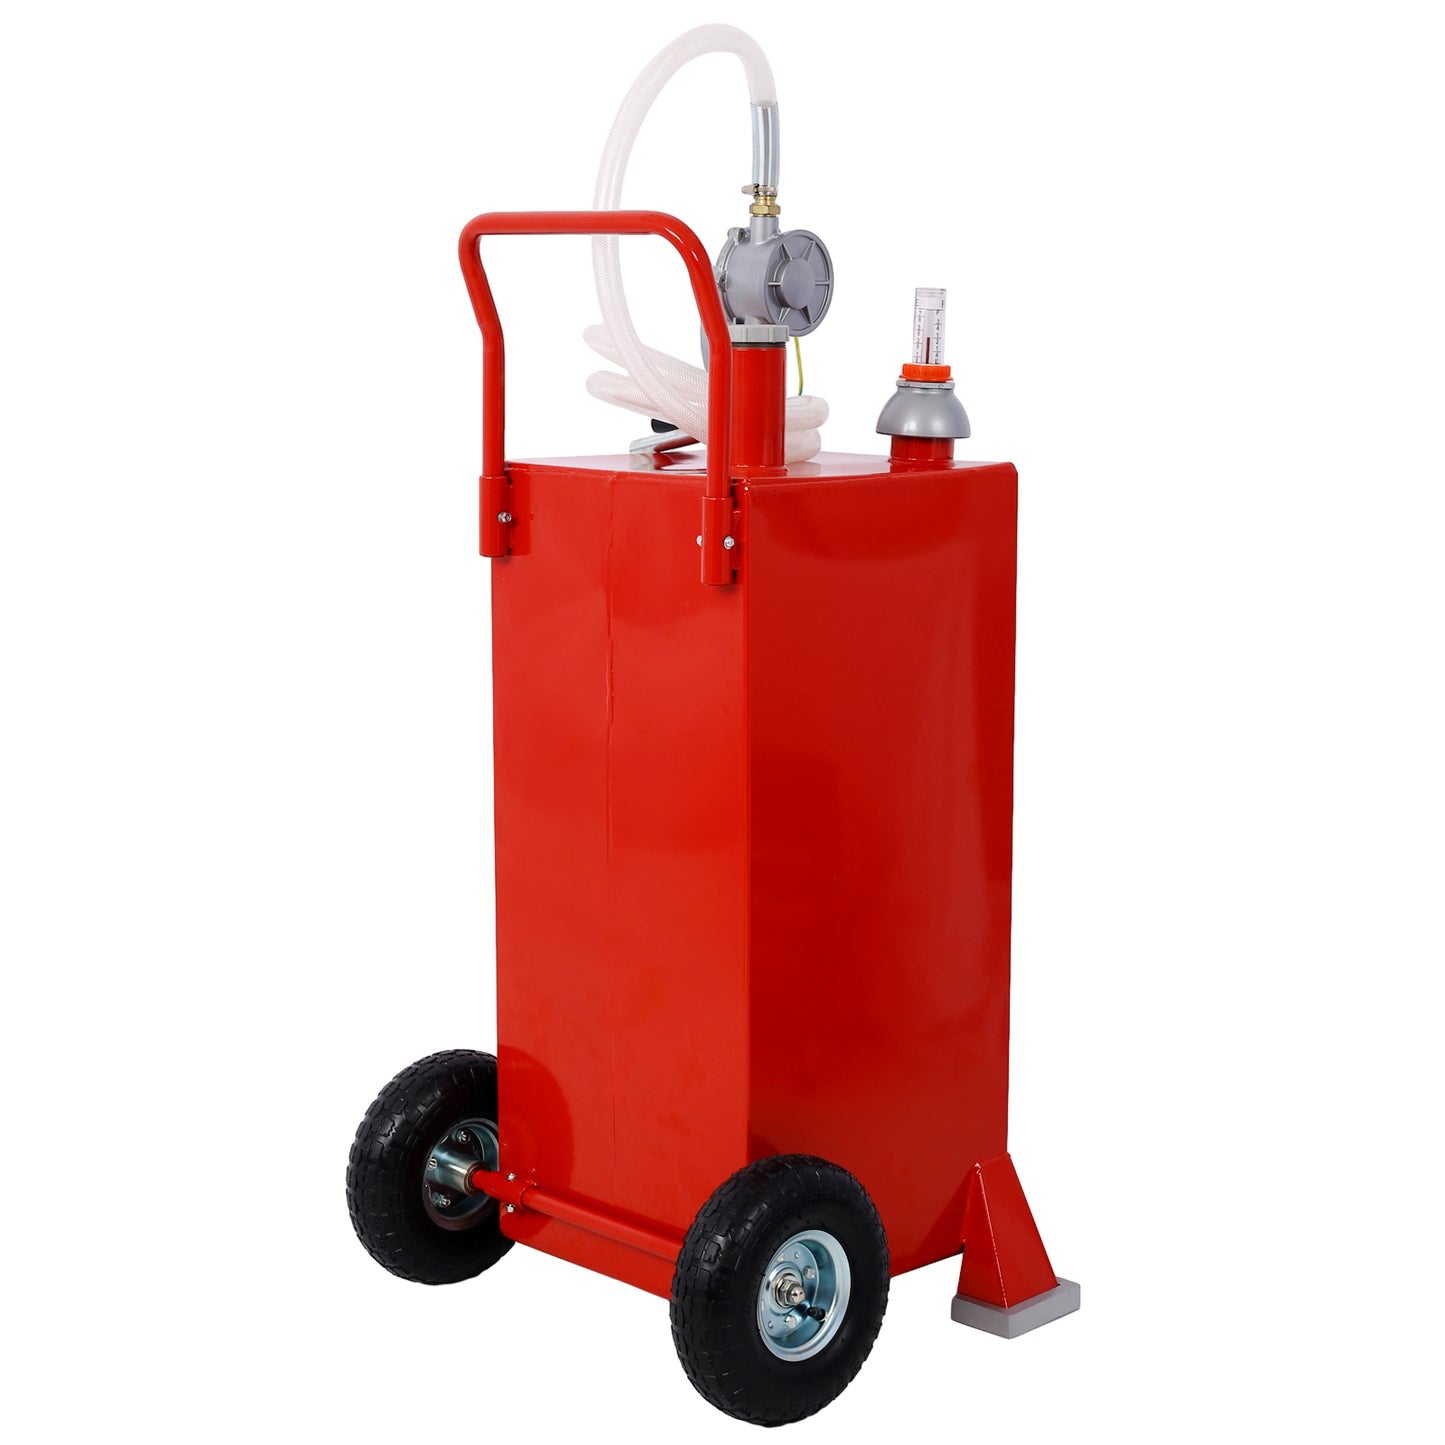 30 Gallon Gas Caddy With Wheels, Fuel Transfer Tank Gasoline Diesel Can Reversible Rotary Hand Siphon Pump, Fuel Storage Tank For Automobiles ATV Car Mowers Tractors Boat Motorcycle(Red)